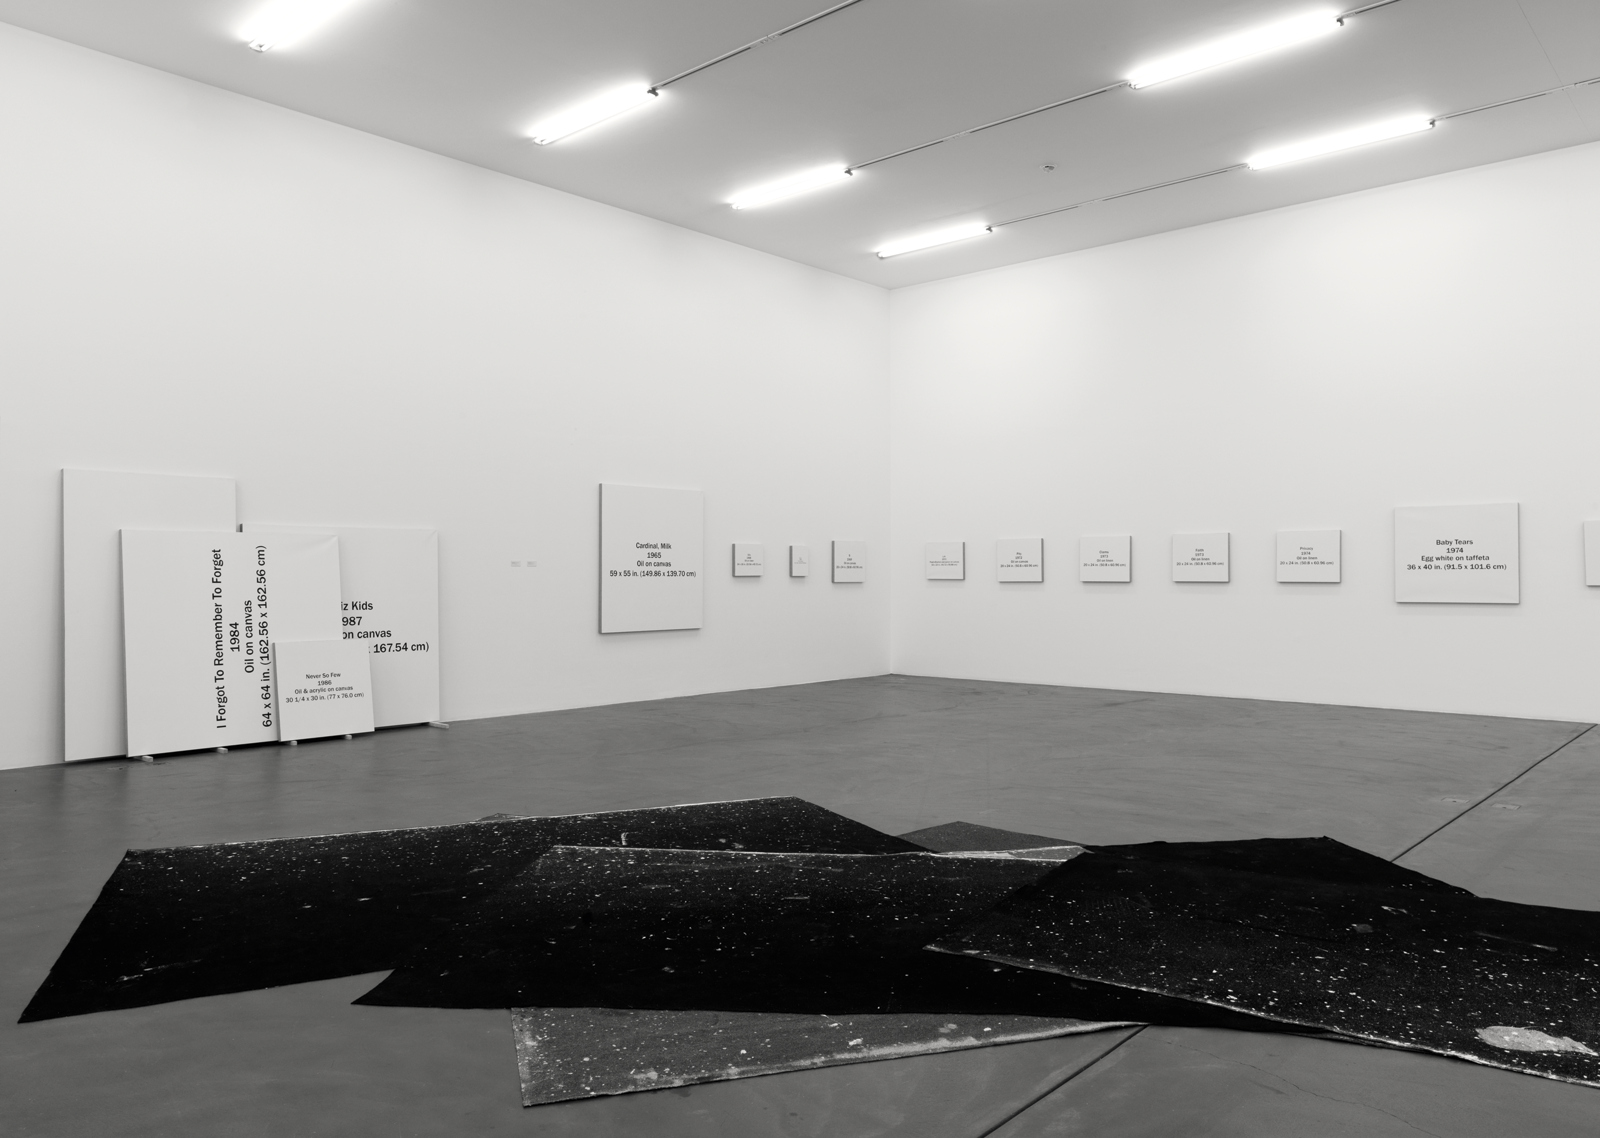 Mario Garcia Torres / "Some Stories that Went Missing, Others that I Belong to, and a Few Studio Works", exhibition view, Kunsthalle Zürich / 2008